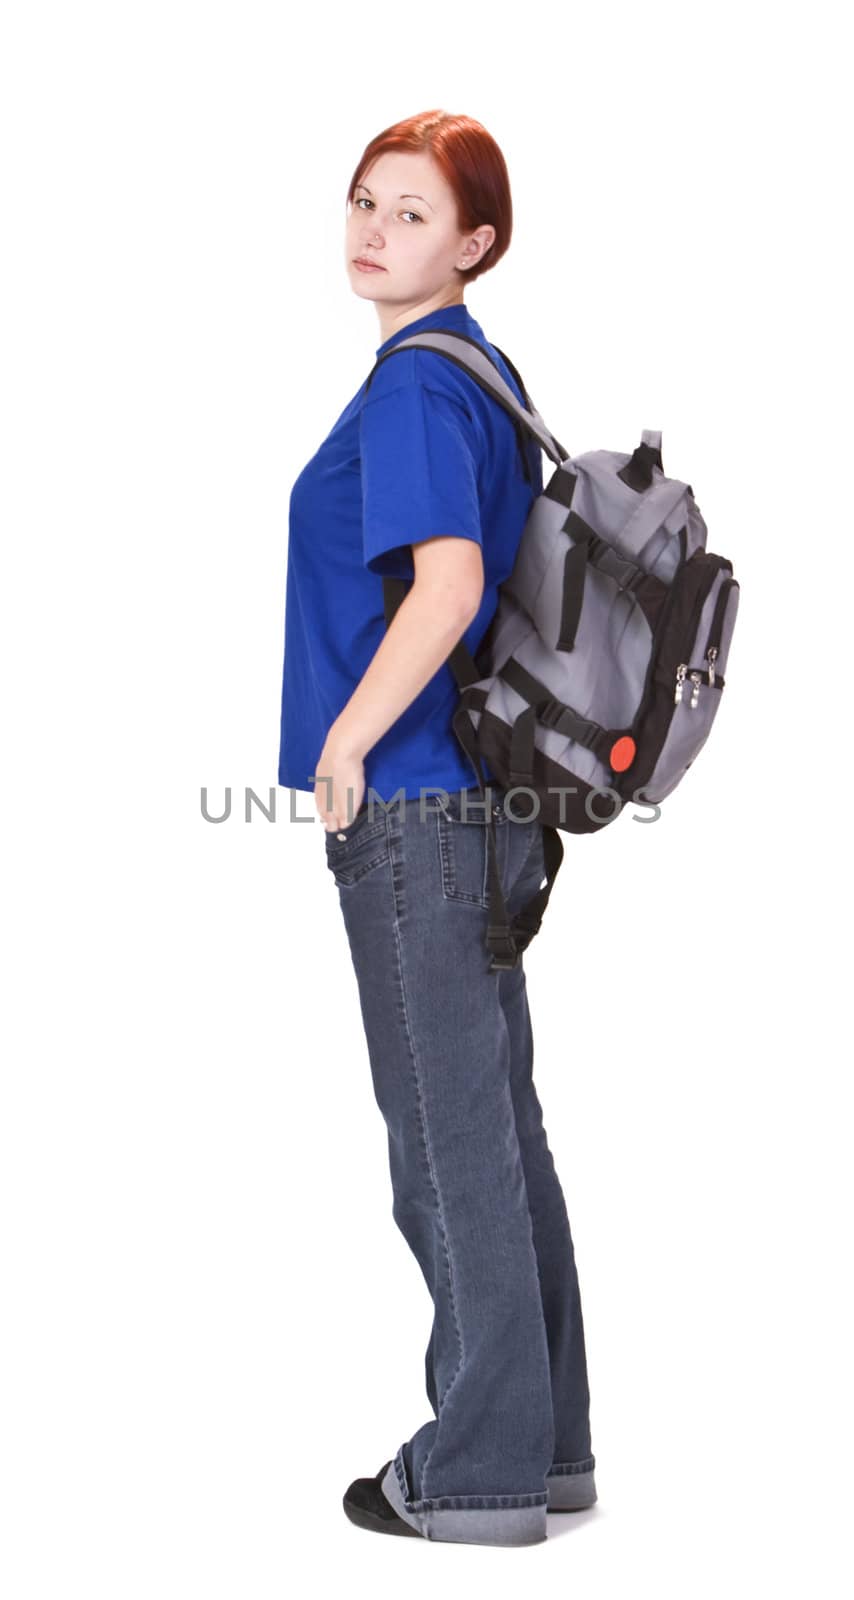 Young redheaded girl with a backpack standing up against a white background.